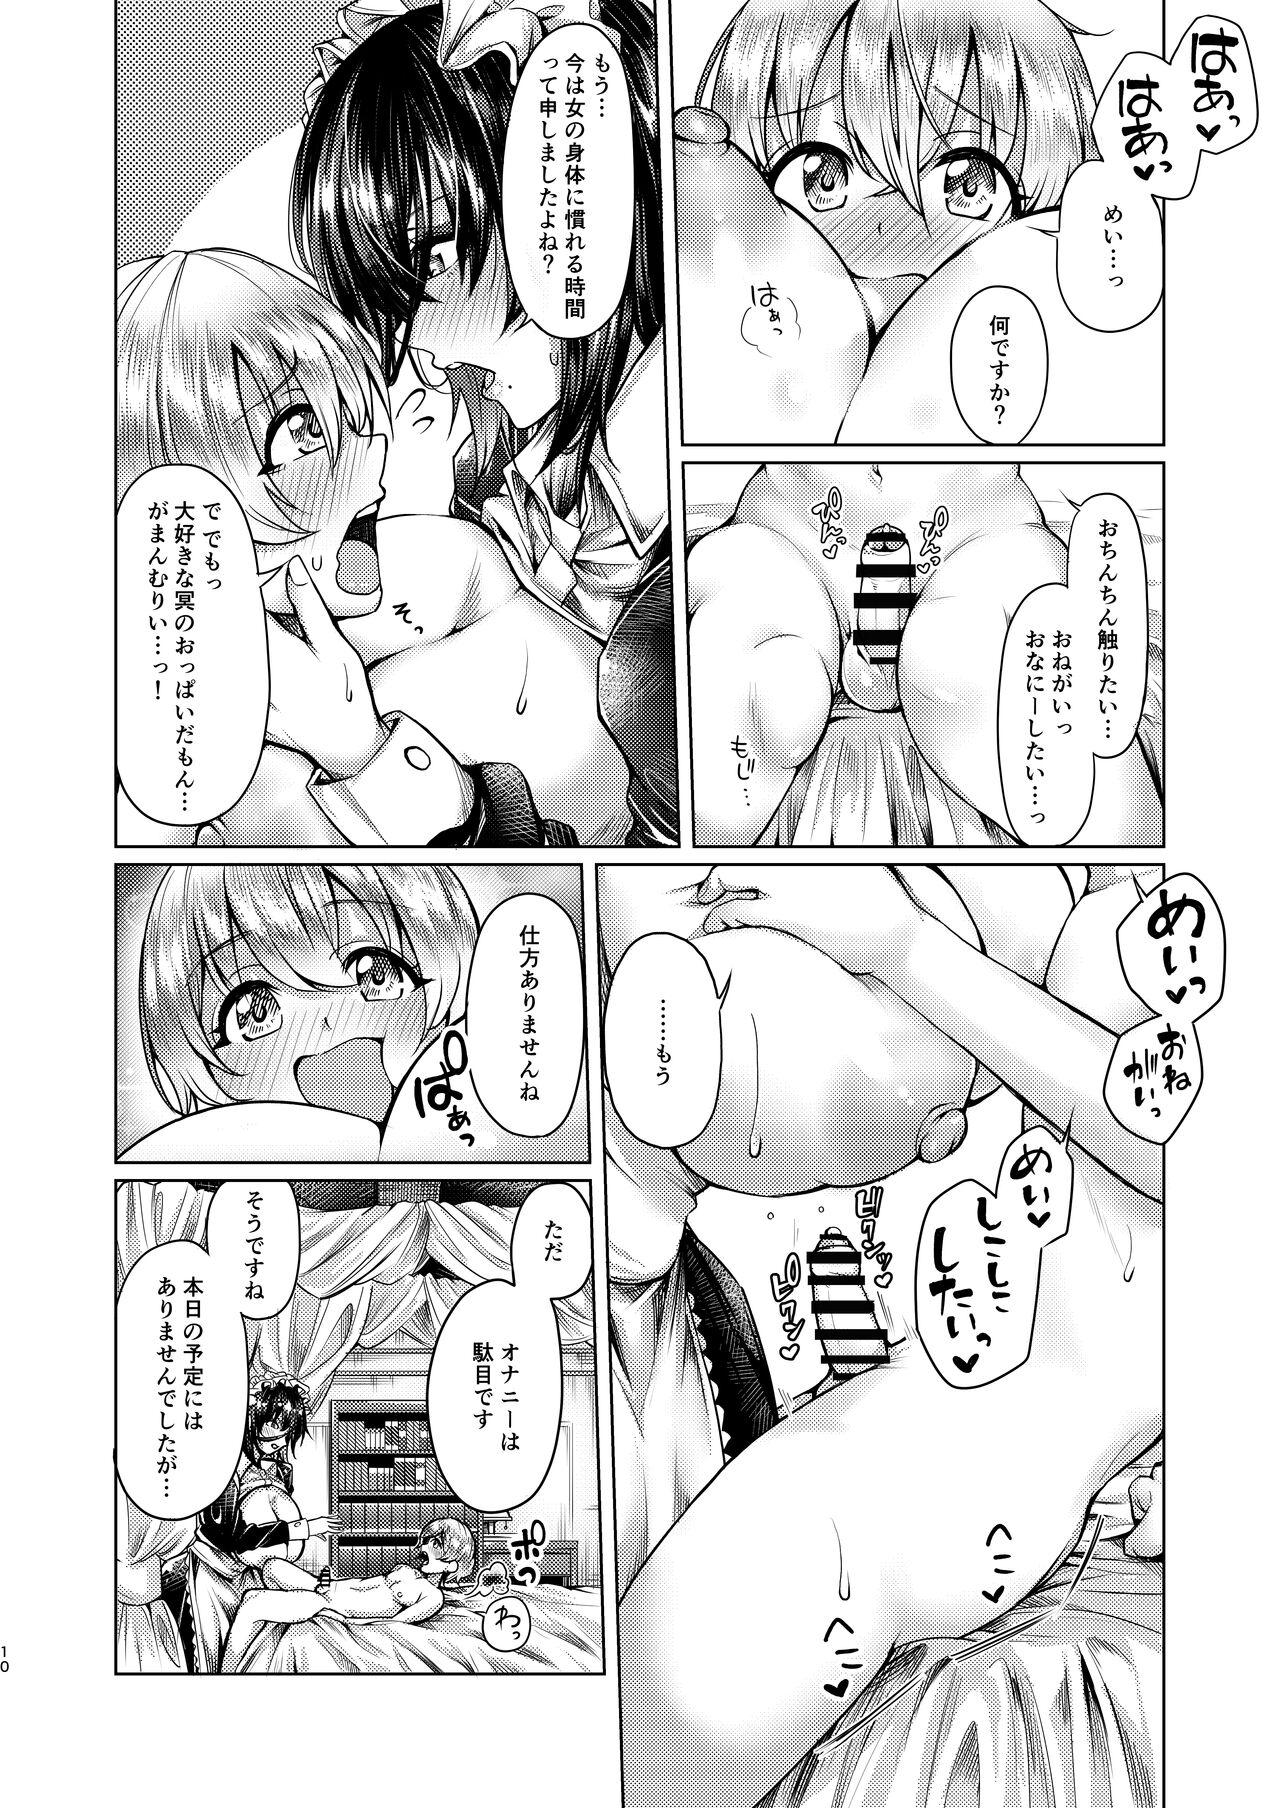 Shota to Maid. - A young boy and his maid 9